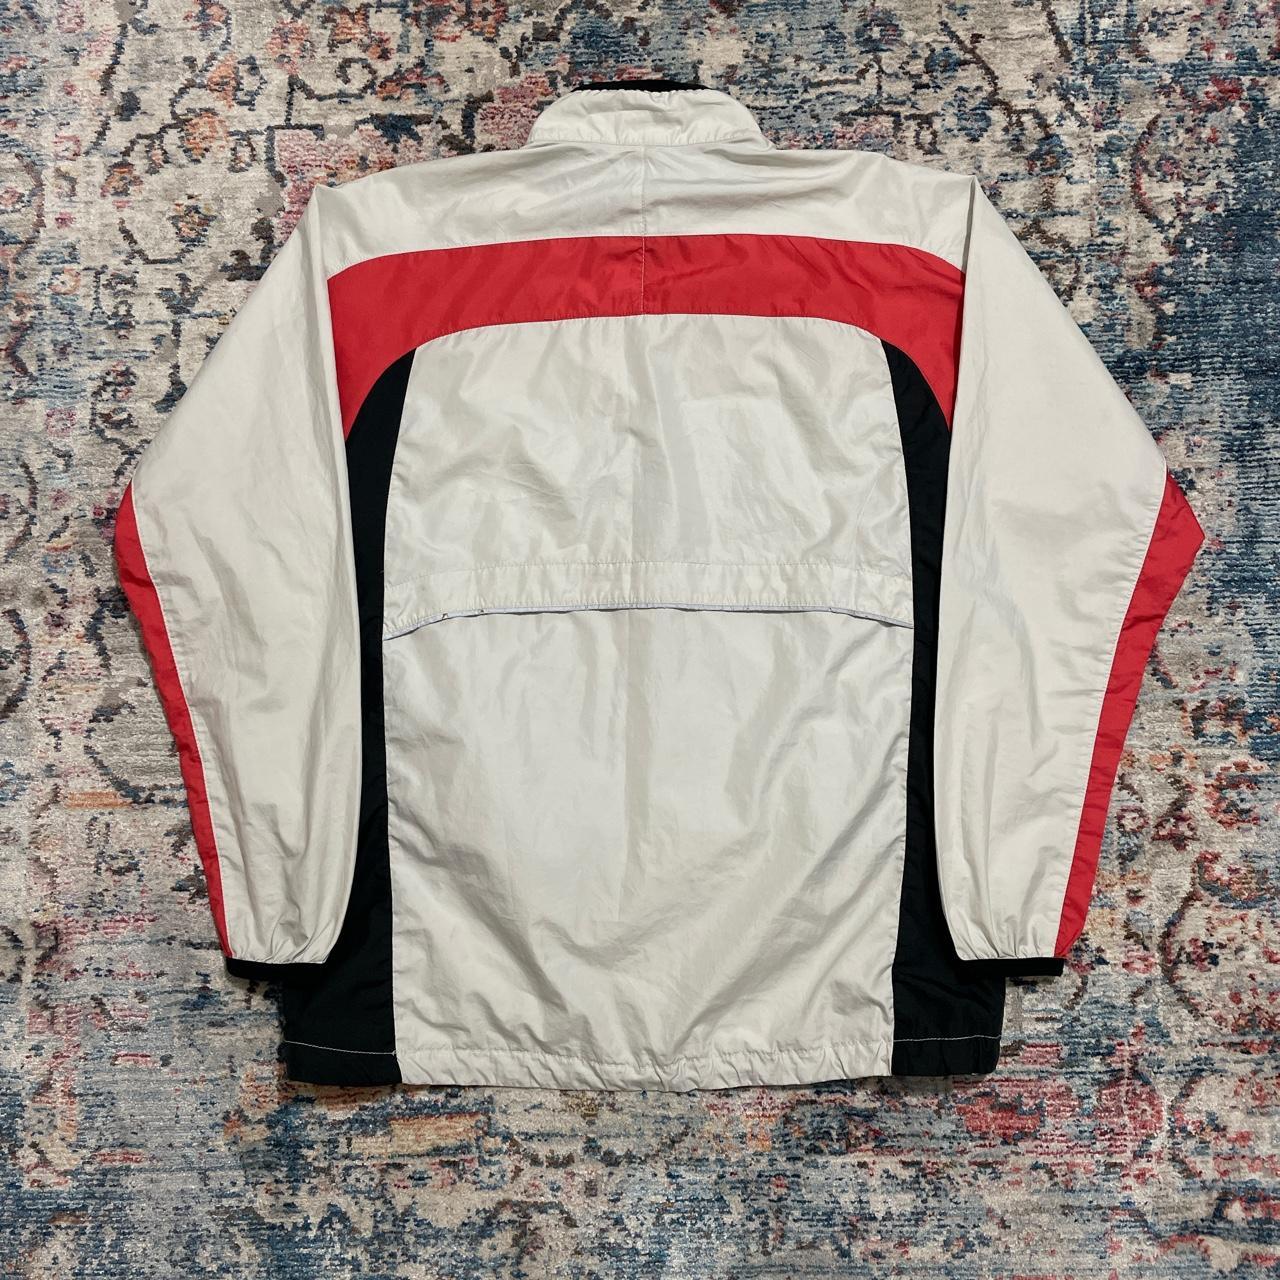 Vintage Nike White and Red Jacket